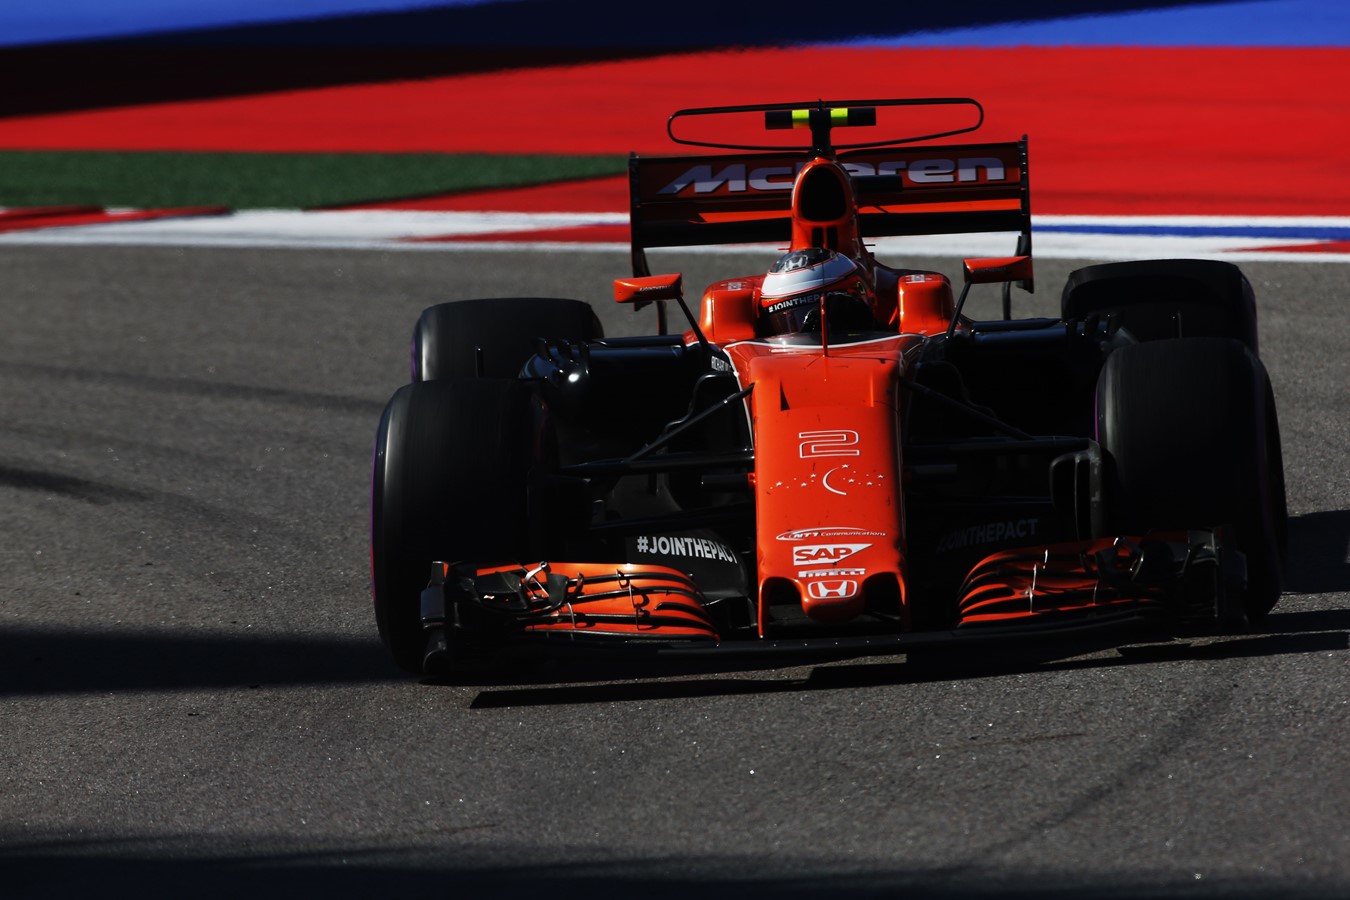 Disappointing afternoon for McLaren-Honda in Russia